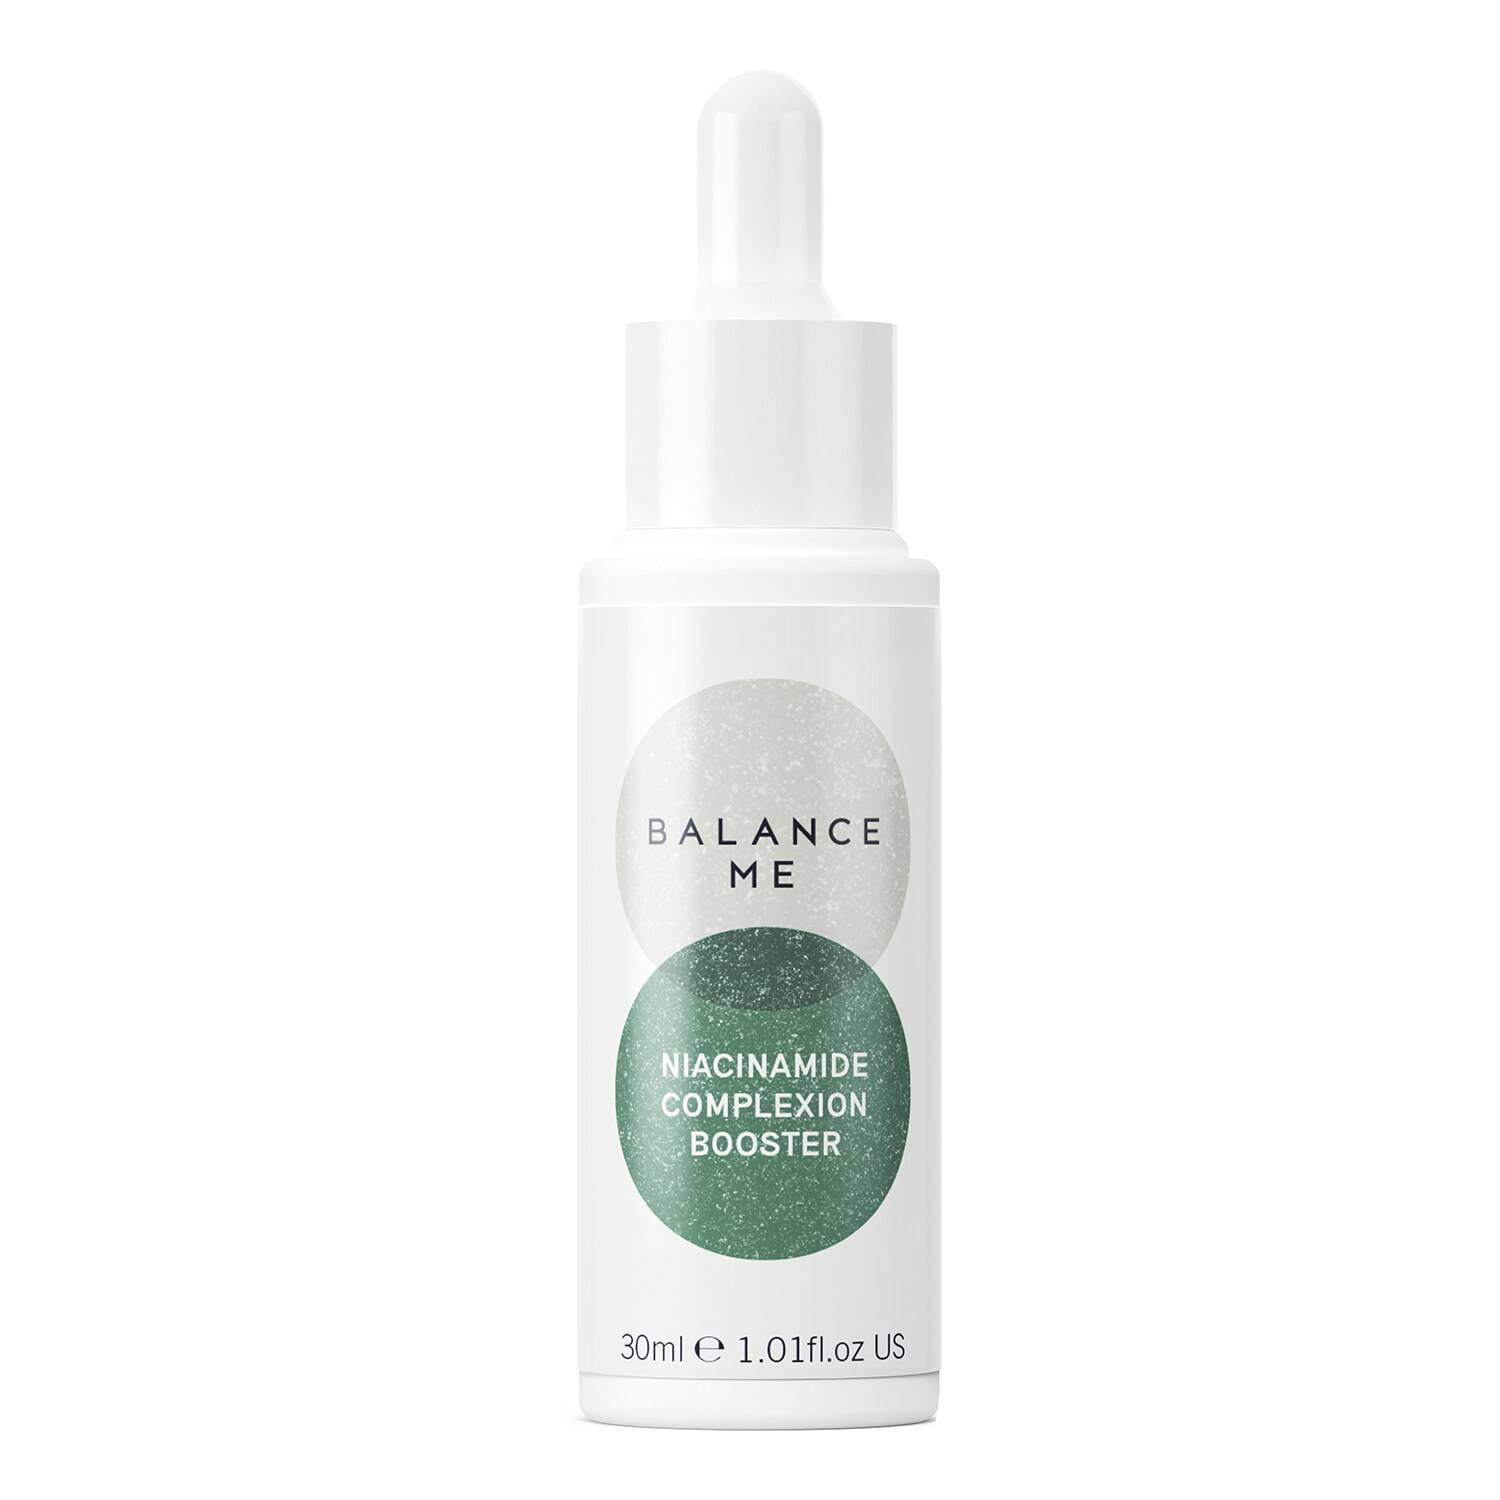 BALANCE ME Niacinamide Complexion Booster 30ml